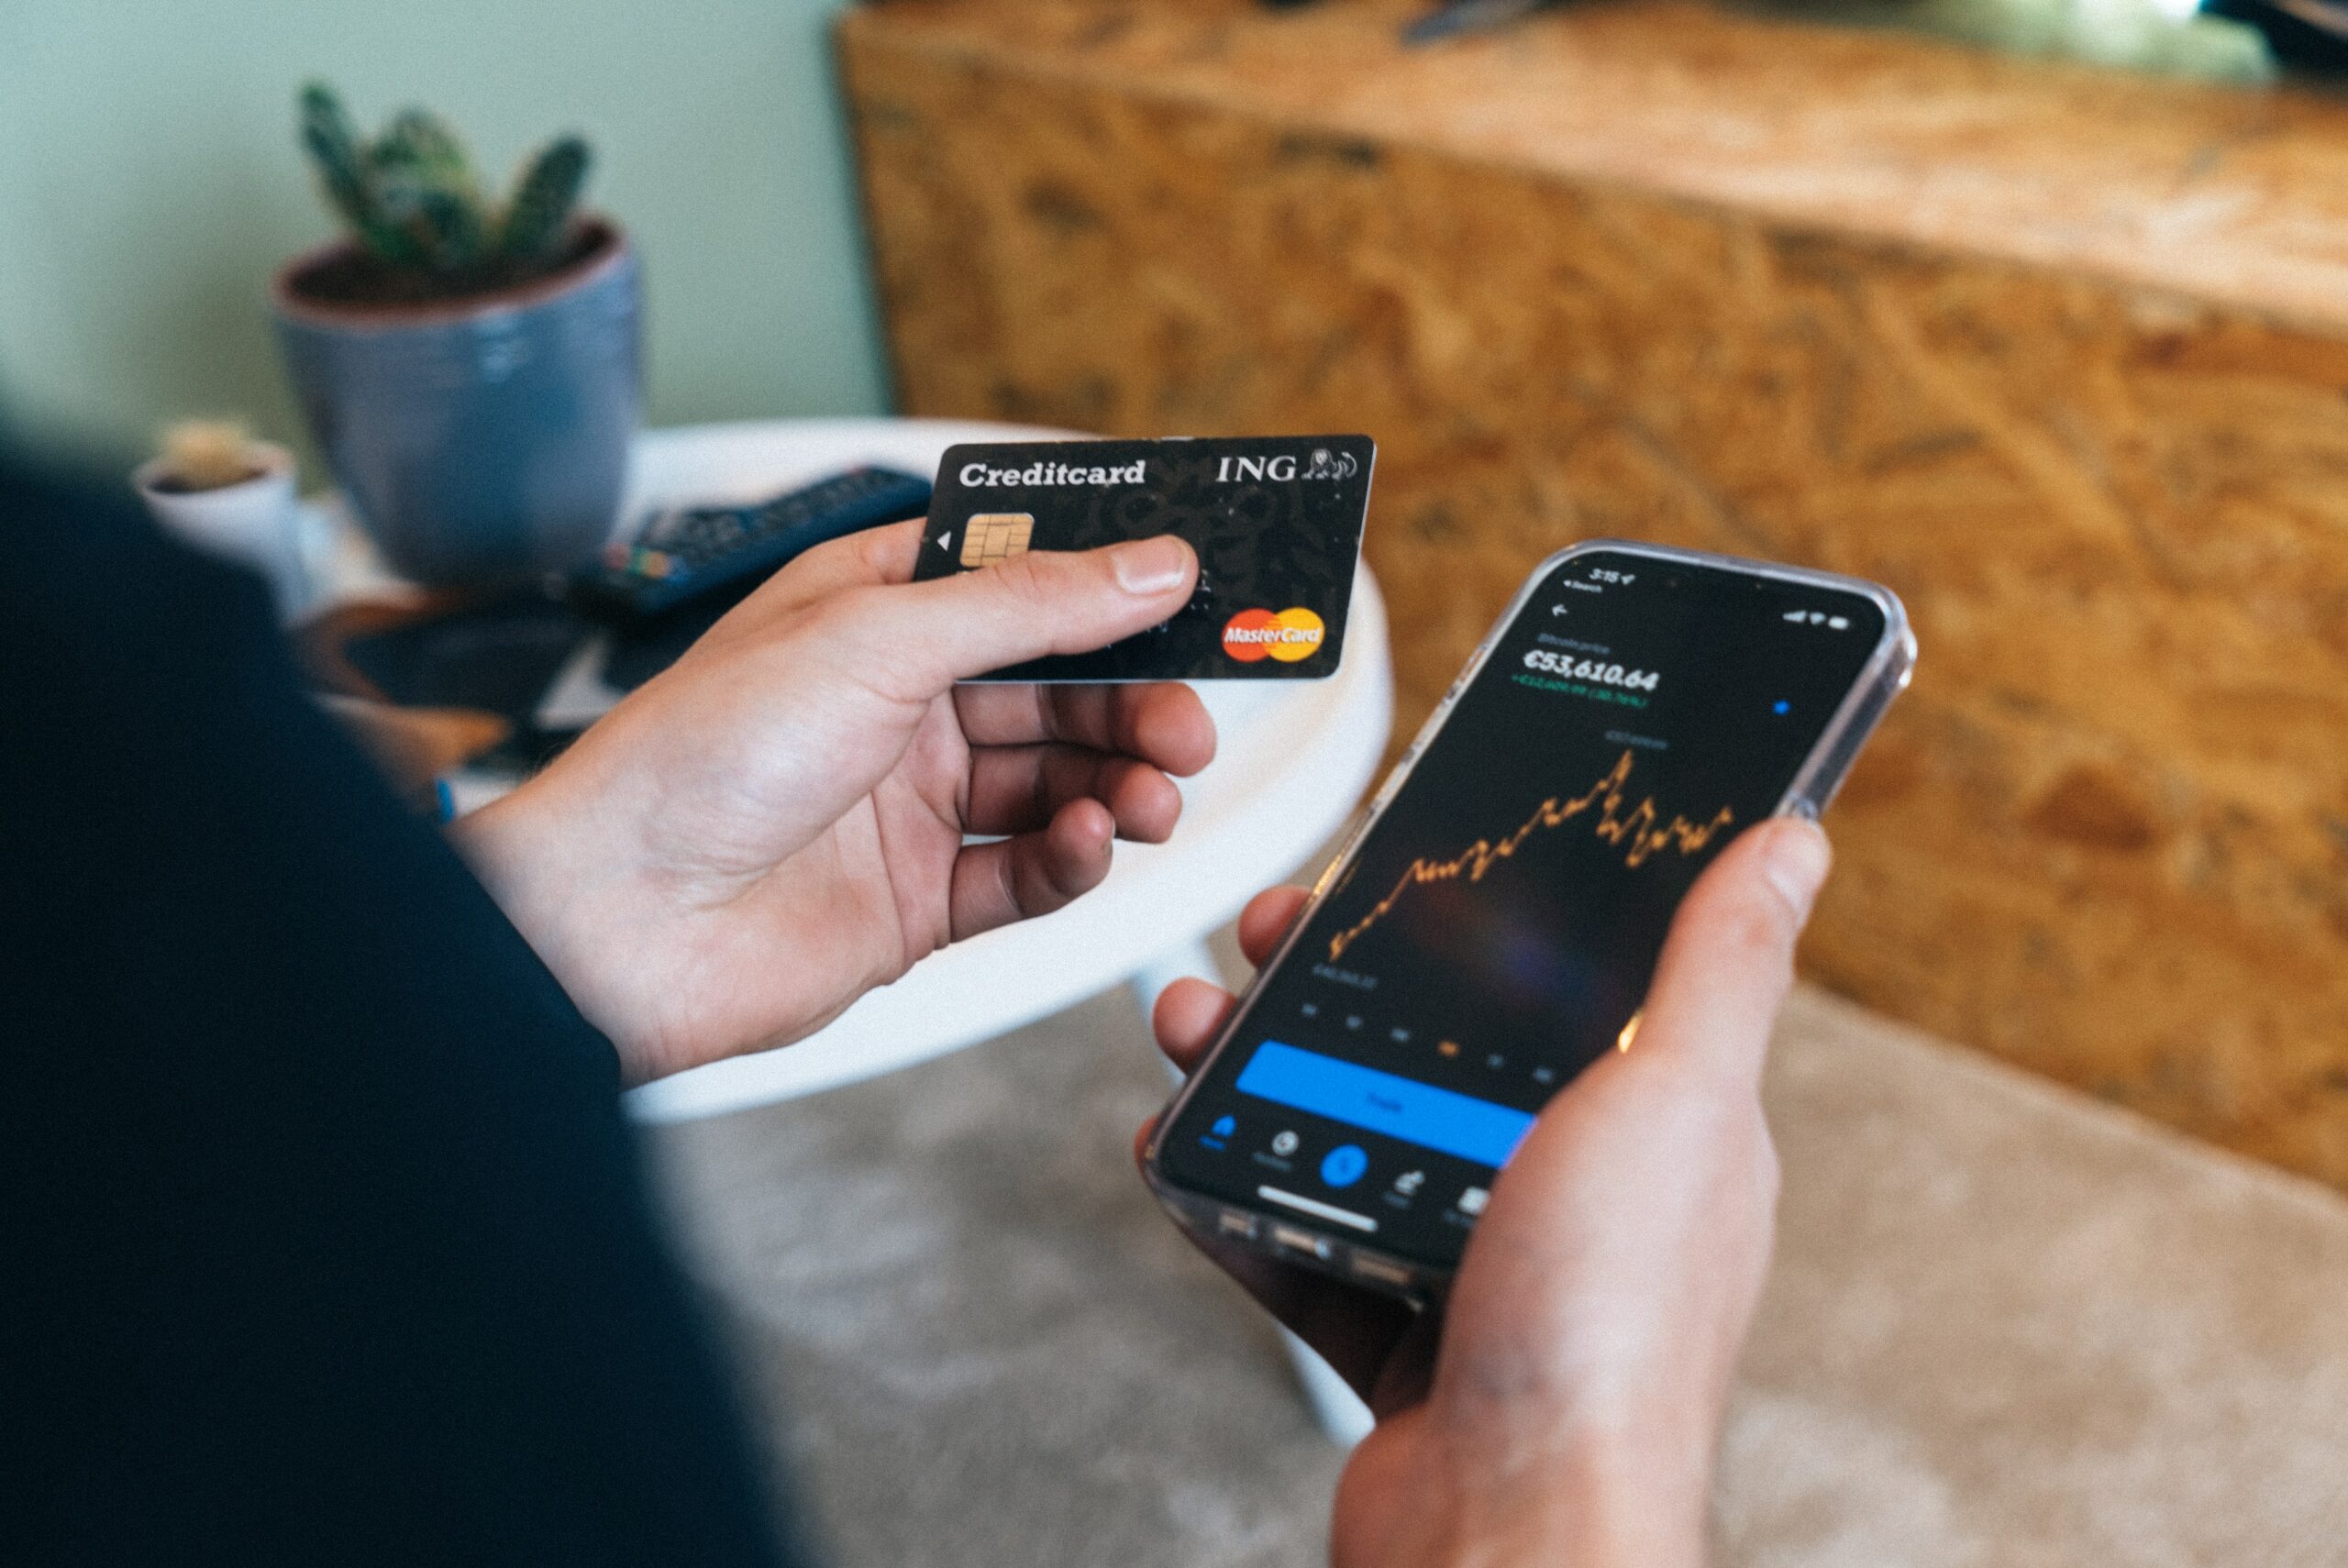 In many markets, crypto partners collaborate with financial institutions to issue cards that enable users to buy bitcoin with Mastercard.